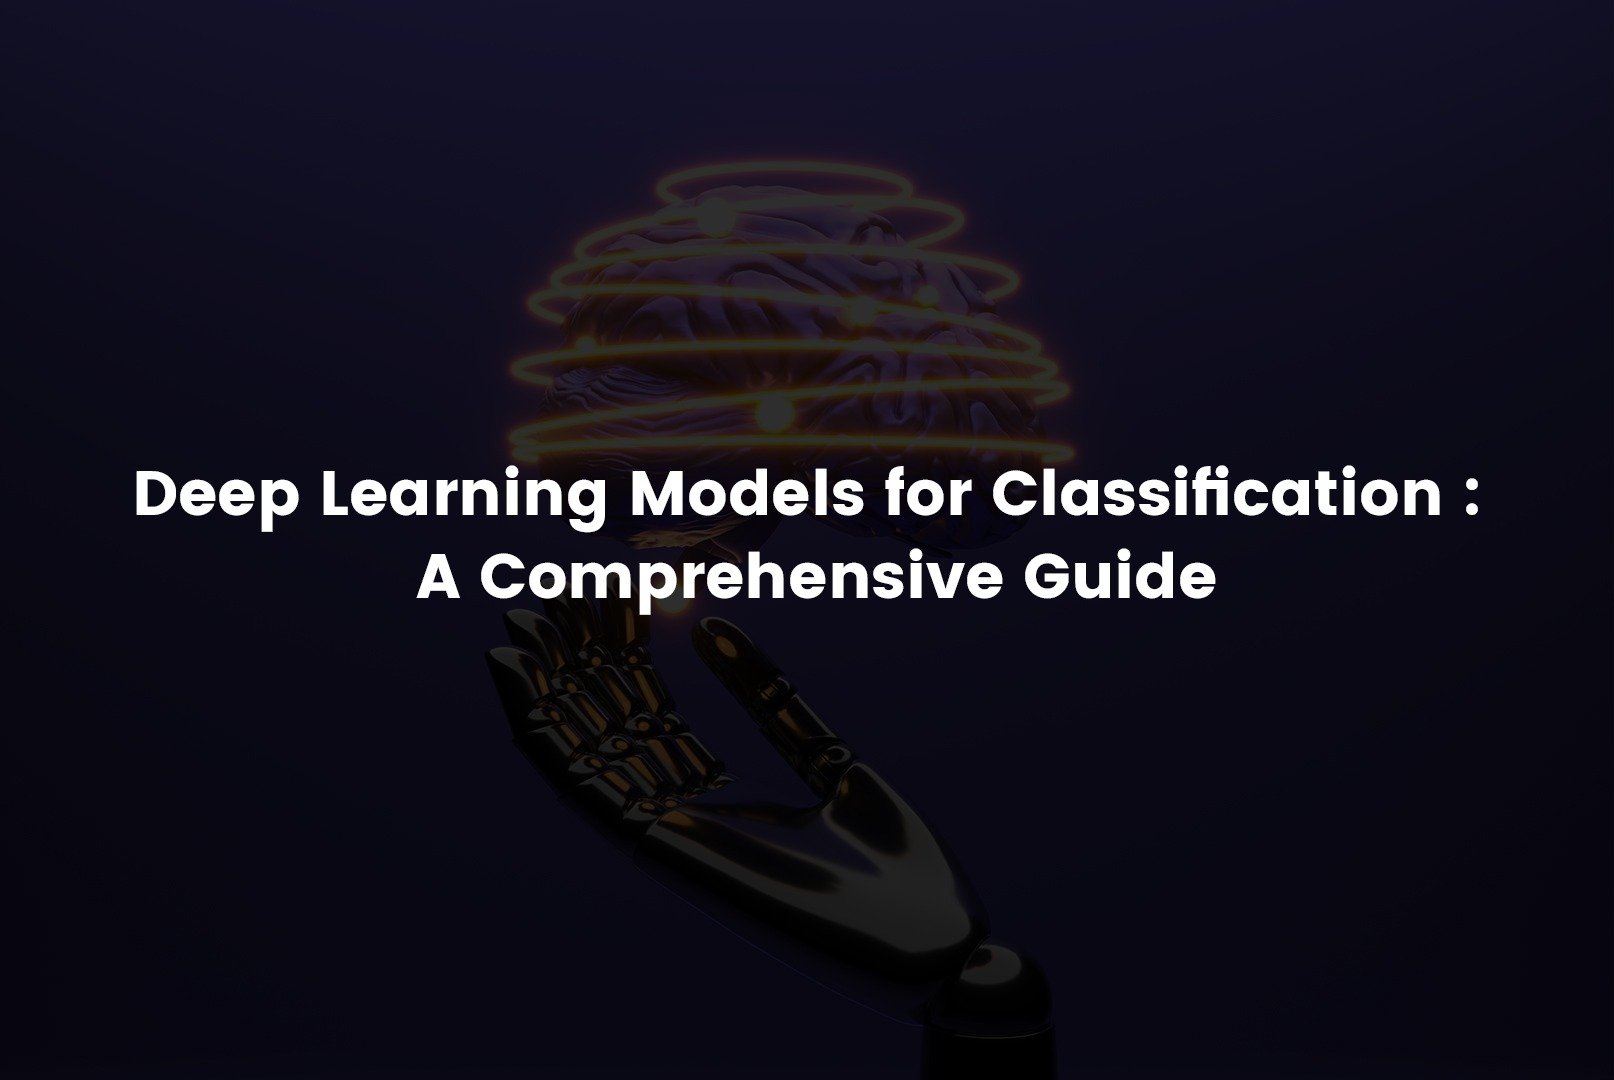 Deep Learning Models for Classification : A Comprehensive Guide